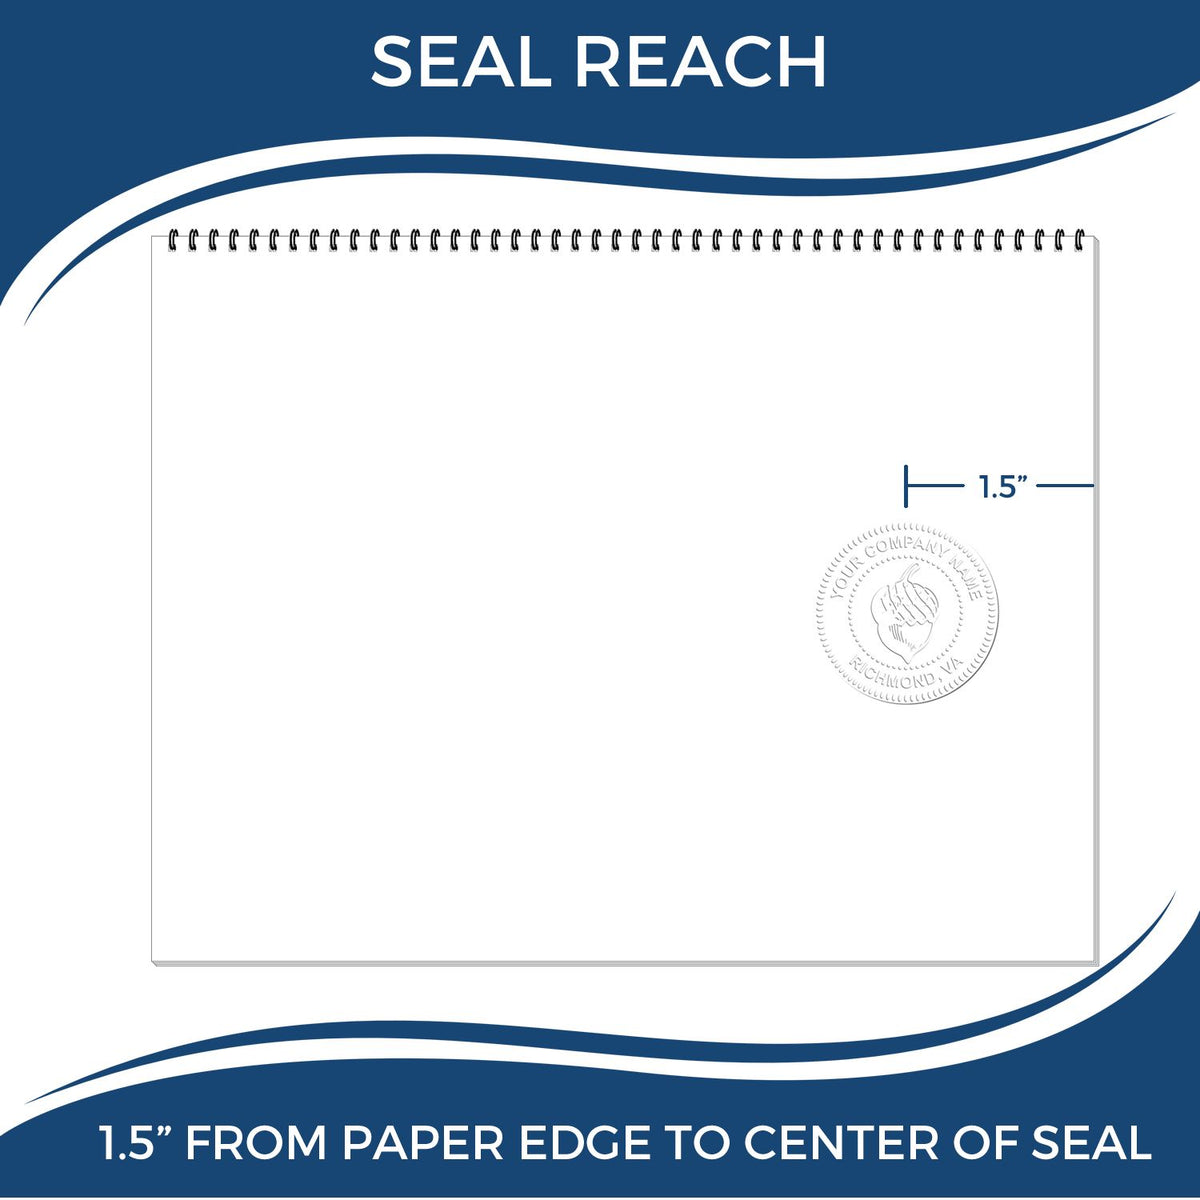 An infographic showing the seal reach which is represented by a ruler and a miniature seal image of the Soft Tennessee Professional Engineer Seal